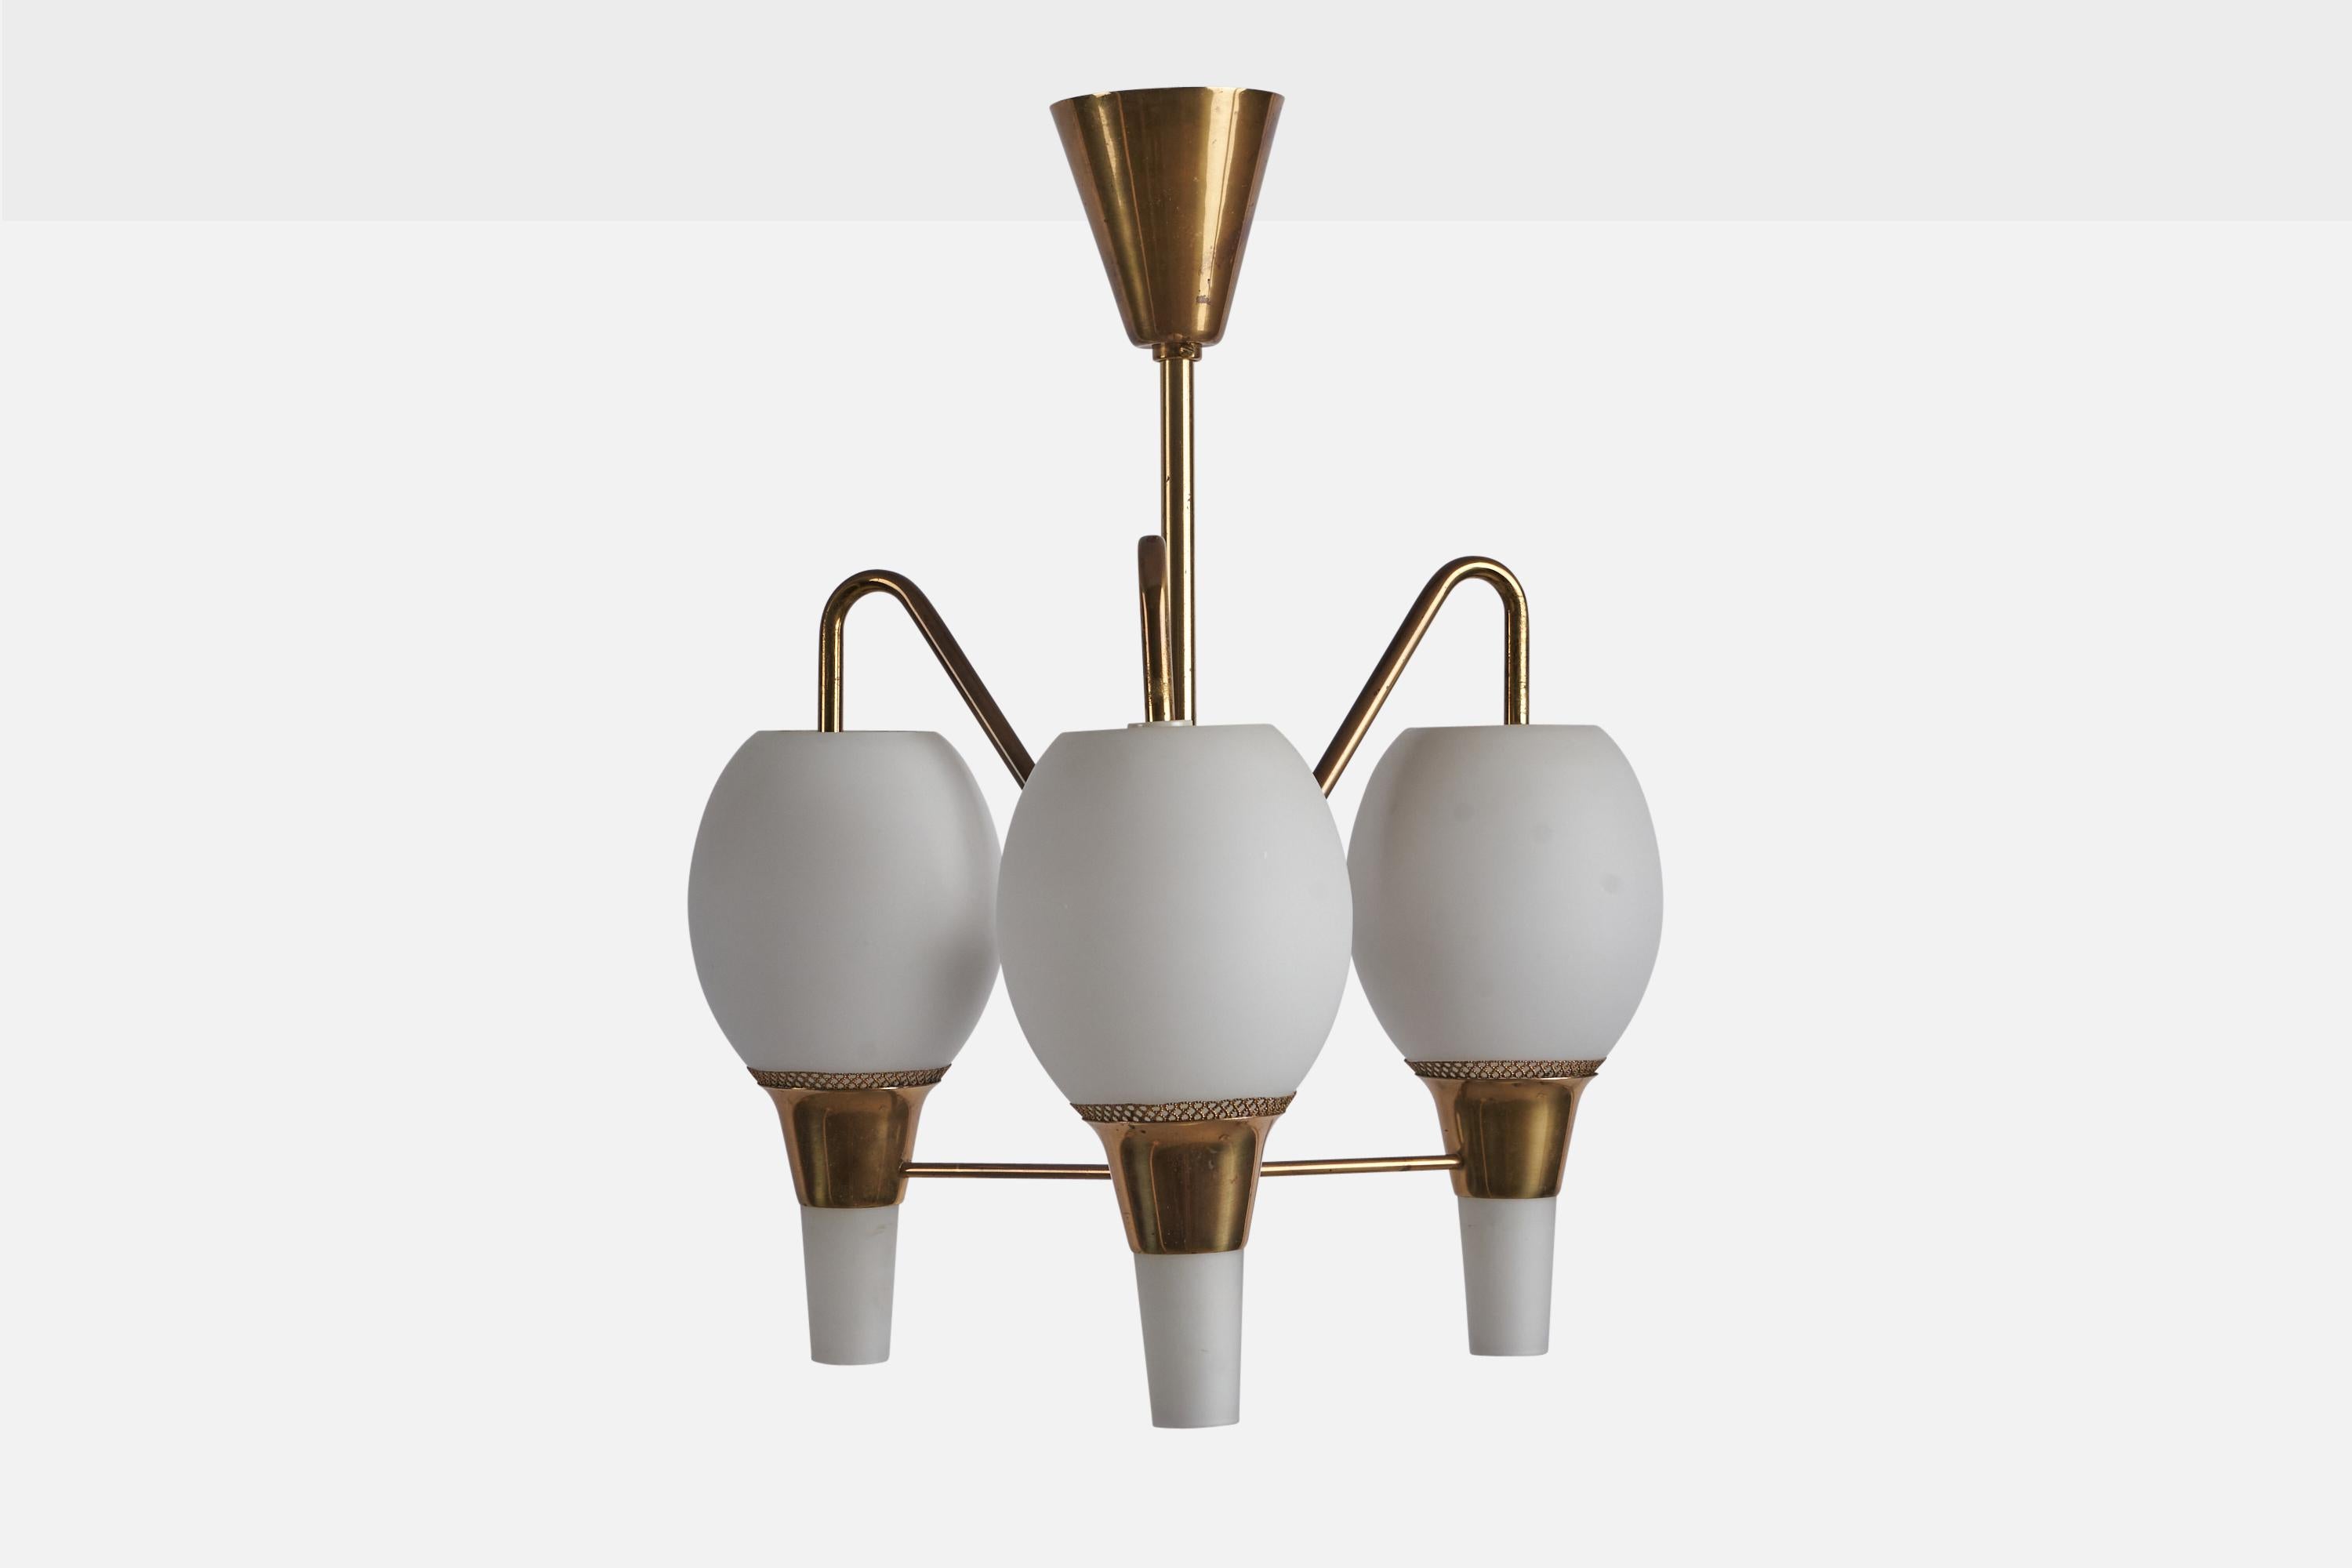 A brass and blue-lacquered metal chandelier designed by Bent Karlby and produced by Lyfa, Denmark, 1960s.

Overall Dimensions (inches): 19” H x 15” Diameter
Bulb Specifications: E-26 Bulb
Number of Sockets: 3